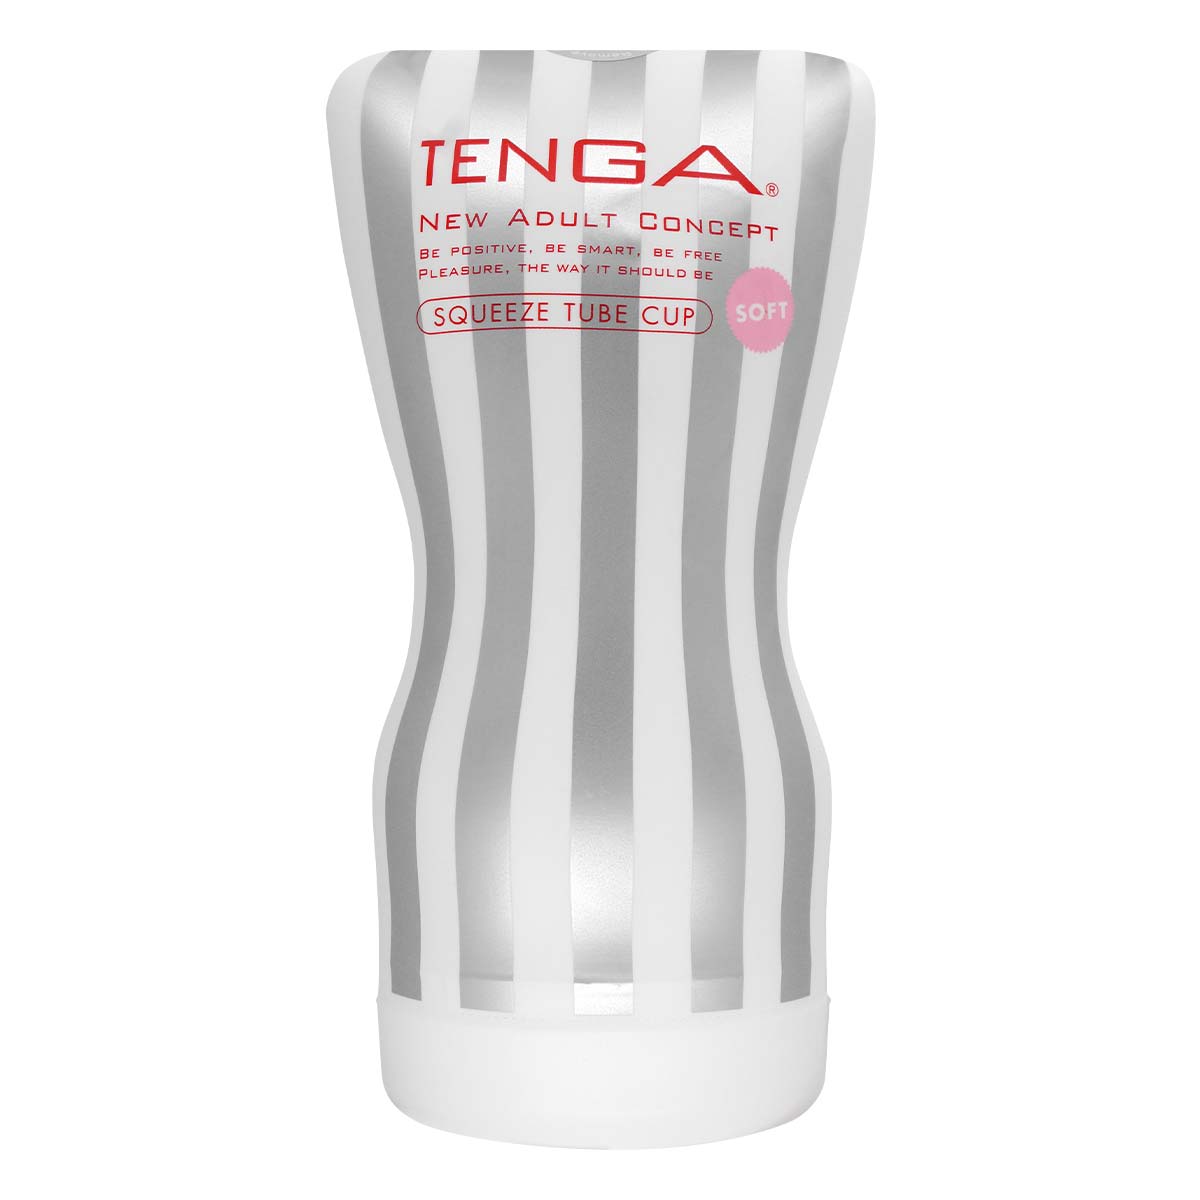 TENGA SQUEEZE TUBE CUP 2nd Generation SOFT-p_2